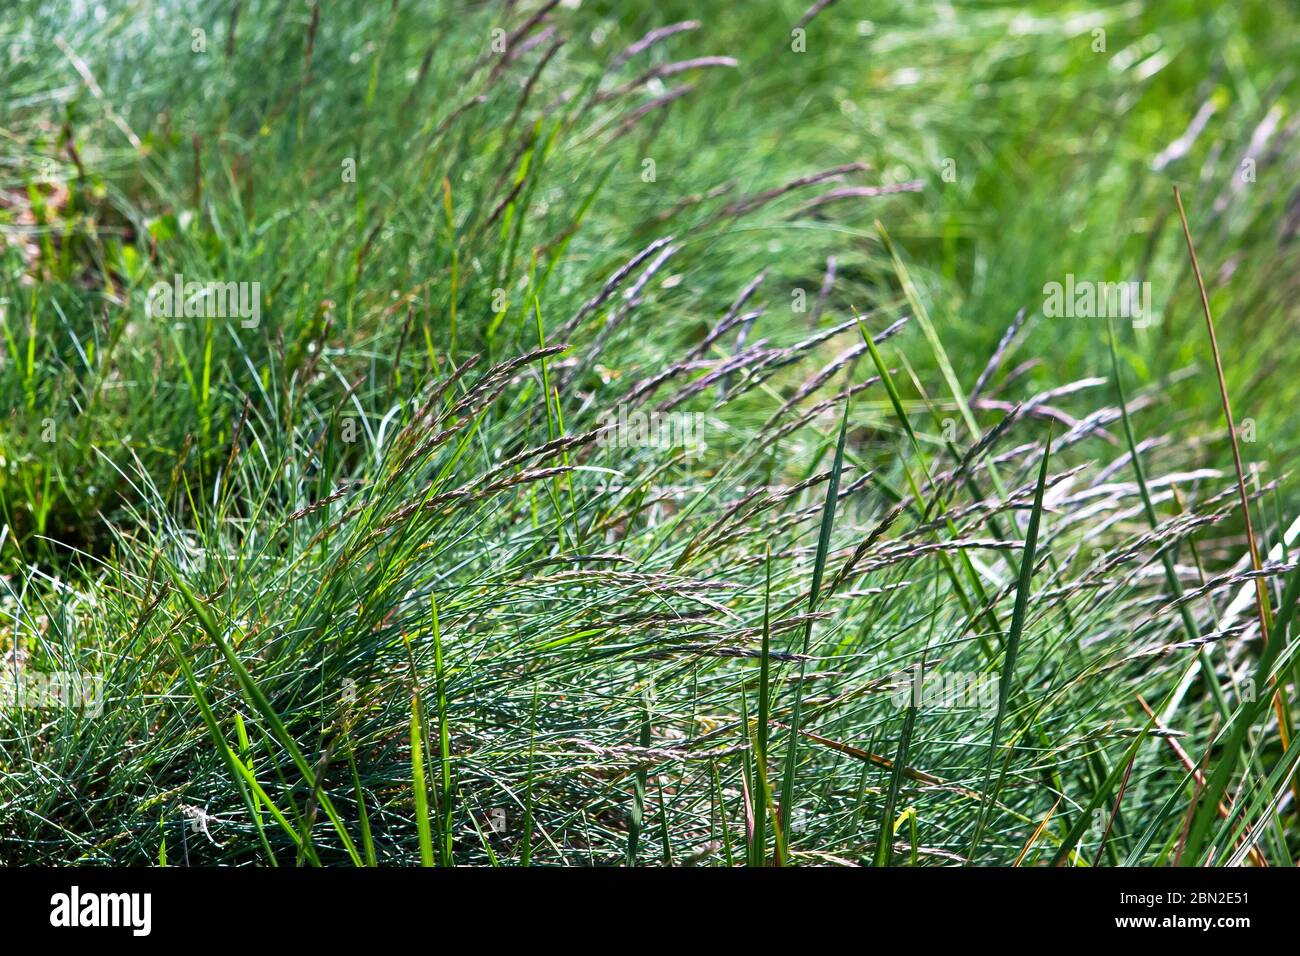 Hierochloe odorata. Hierochloe odorata or Anthoxanthum nitens[1] (commonly known as sweet grass, manna grass, Mary’s grass or vanilla grass, and as ho Stock Photo